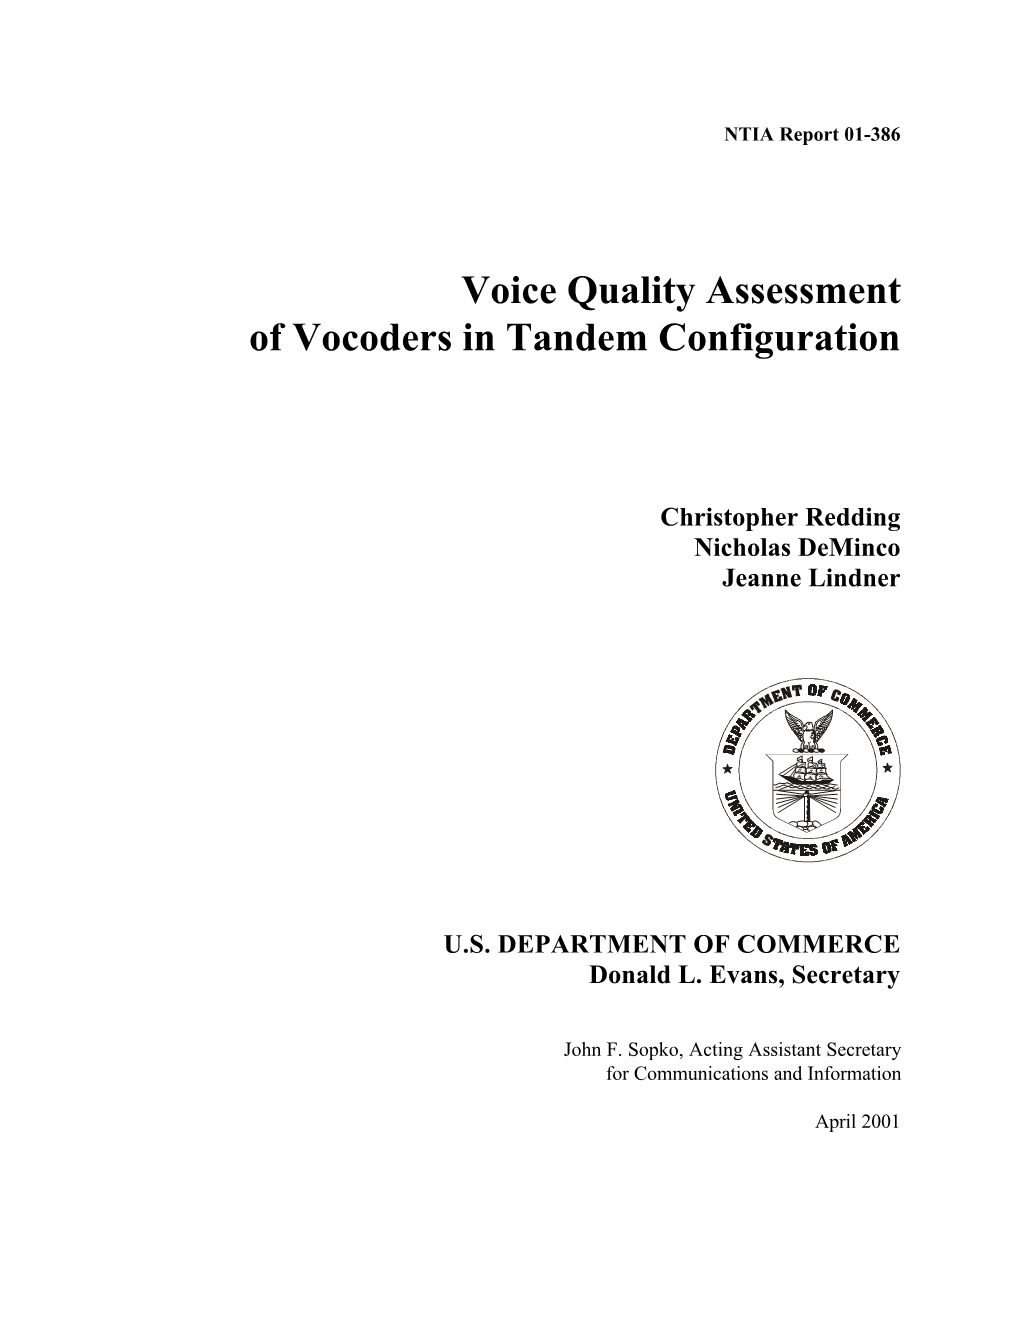 NTIA Technical Report TR-01-386 Voice Quality Assessment Of